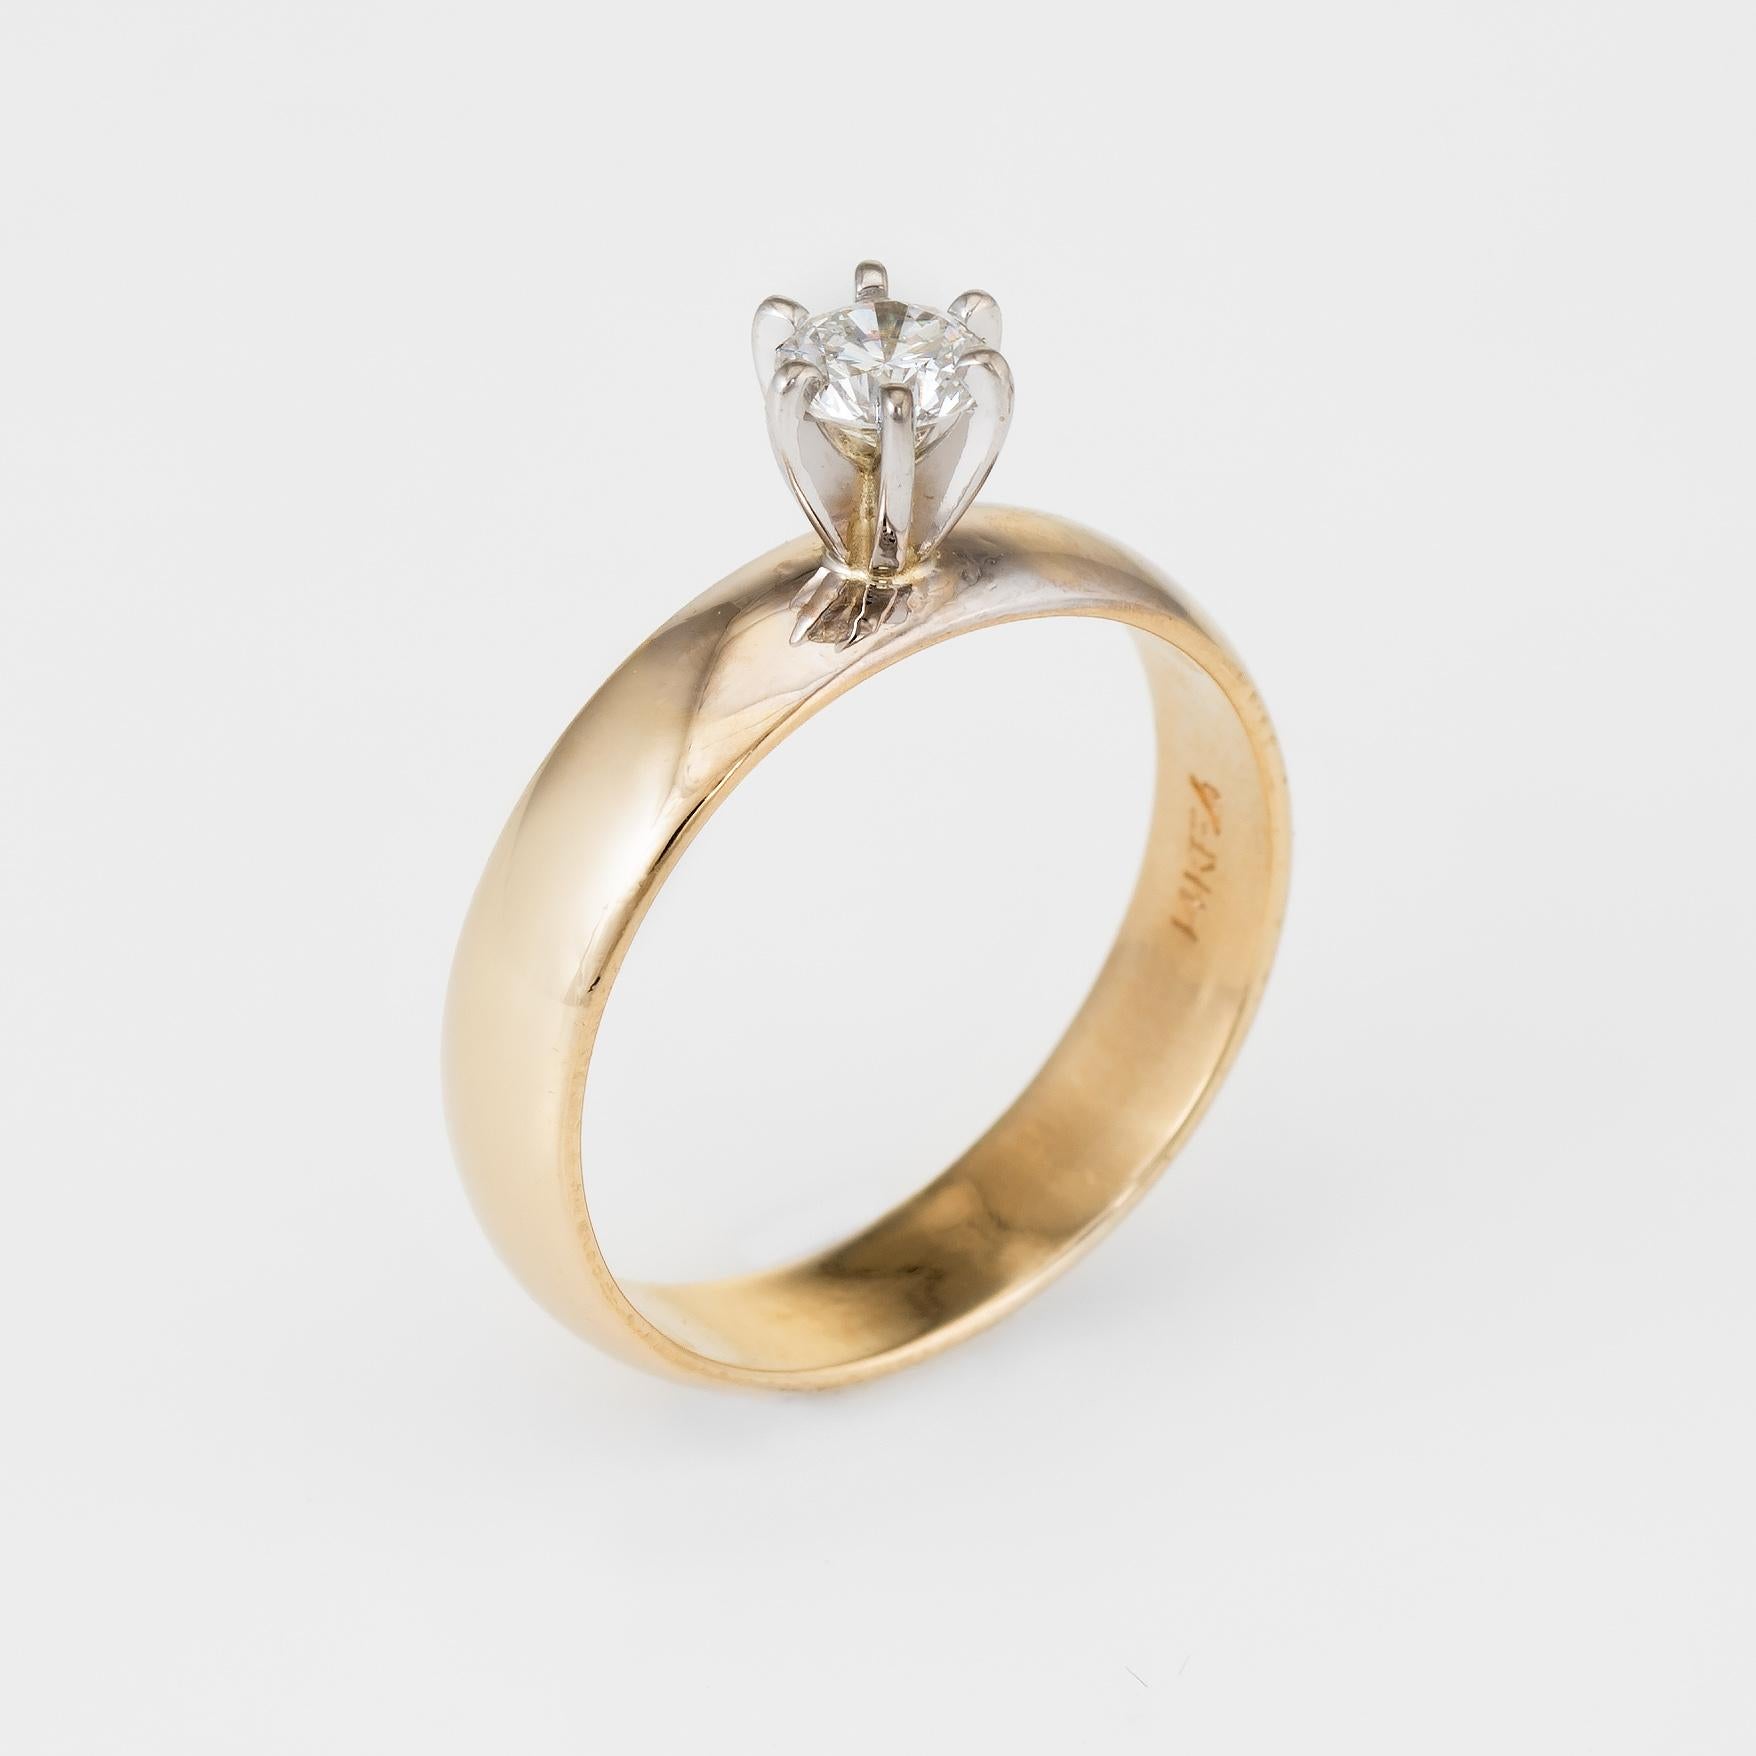 Elegant diamond engagement ring, crafted in 14 karat yellow gold. 

Round brilliant cut diamond is estimated at 0.25 carats (estimated at H-I color and SI1 clarity), set into a six pronged mount.  

The ring is in excellent condition.